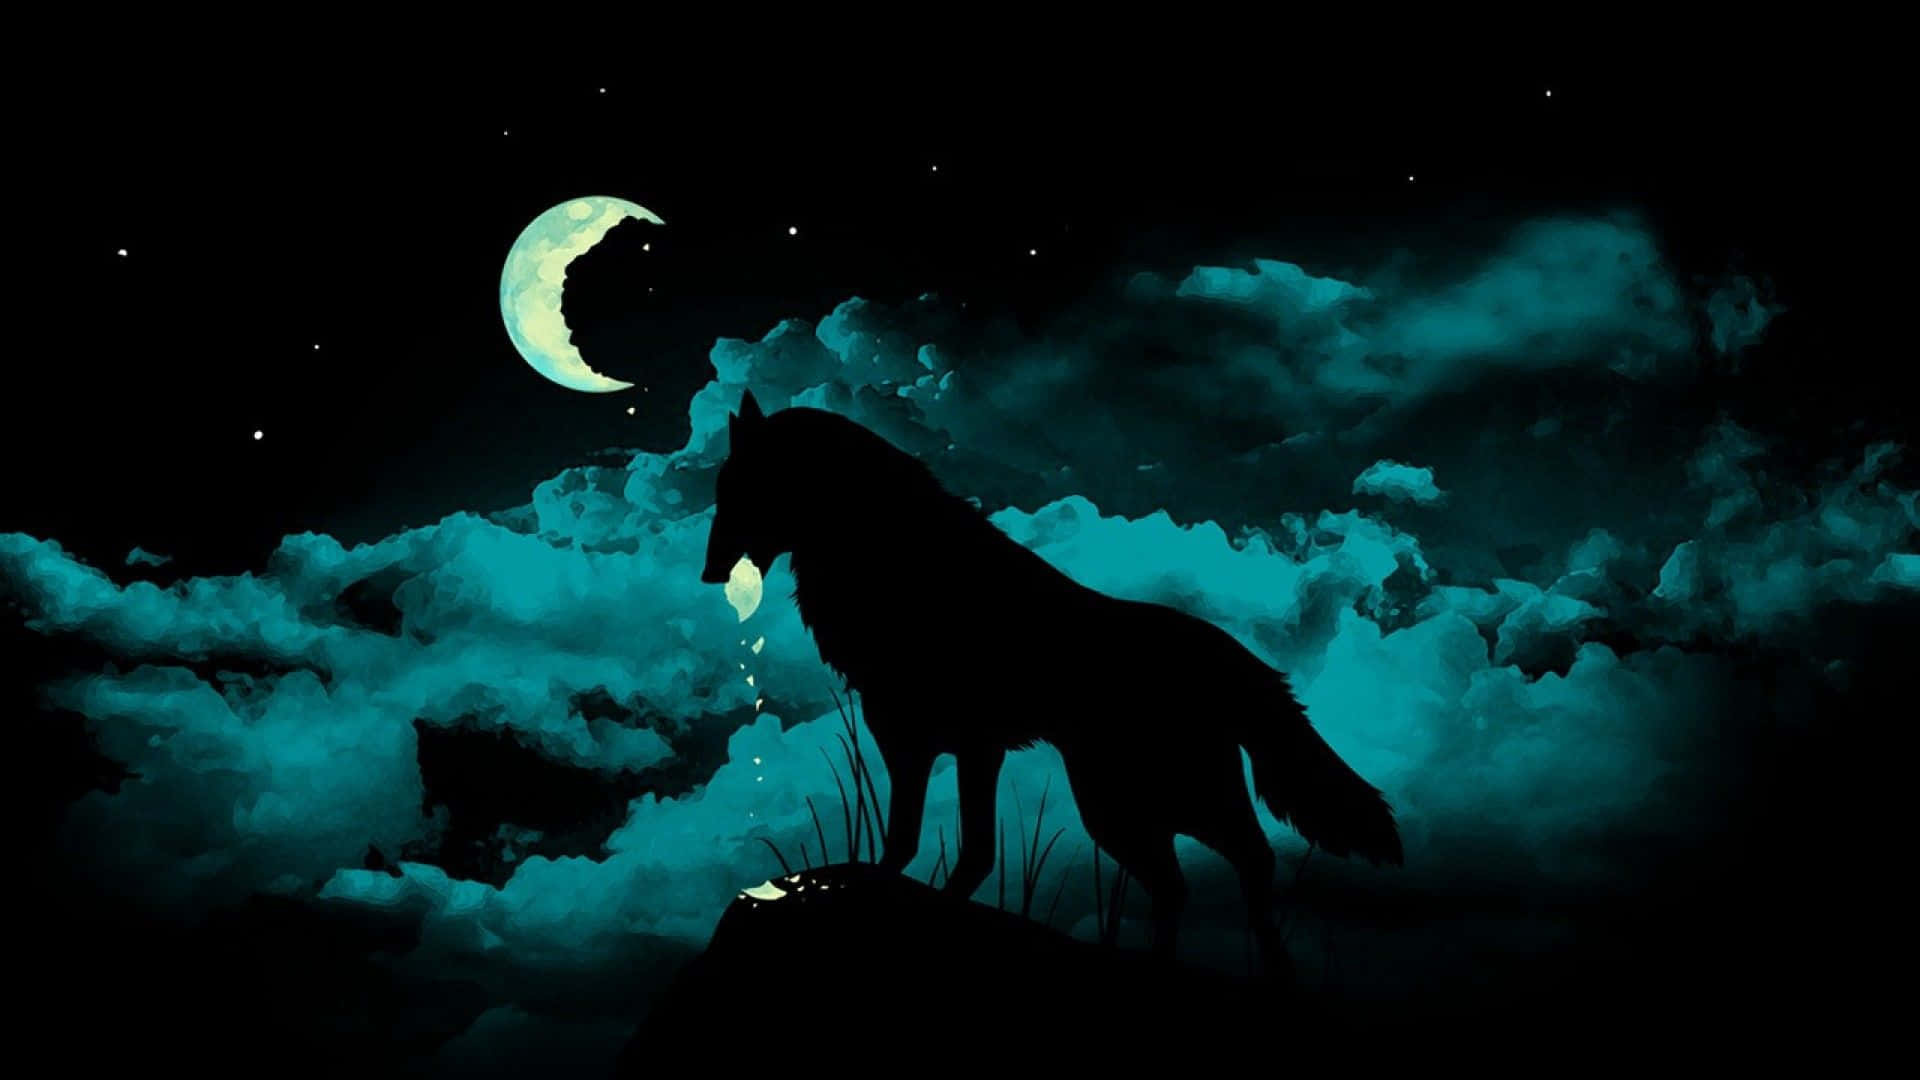 Majestic Howling Wolf on a Full Moon Night Wallpaper